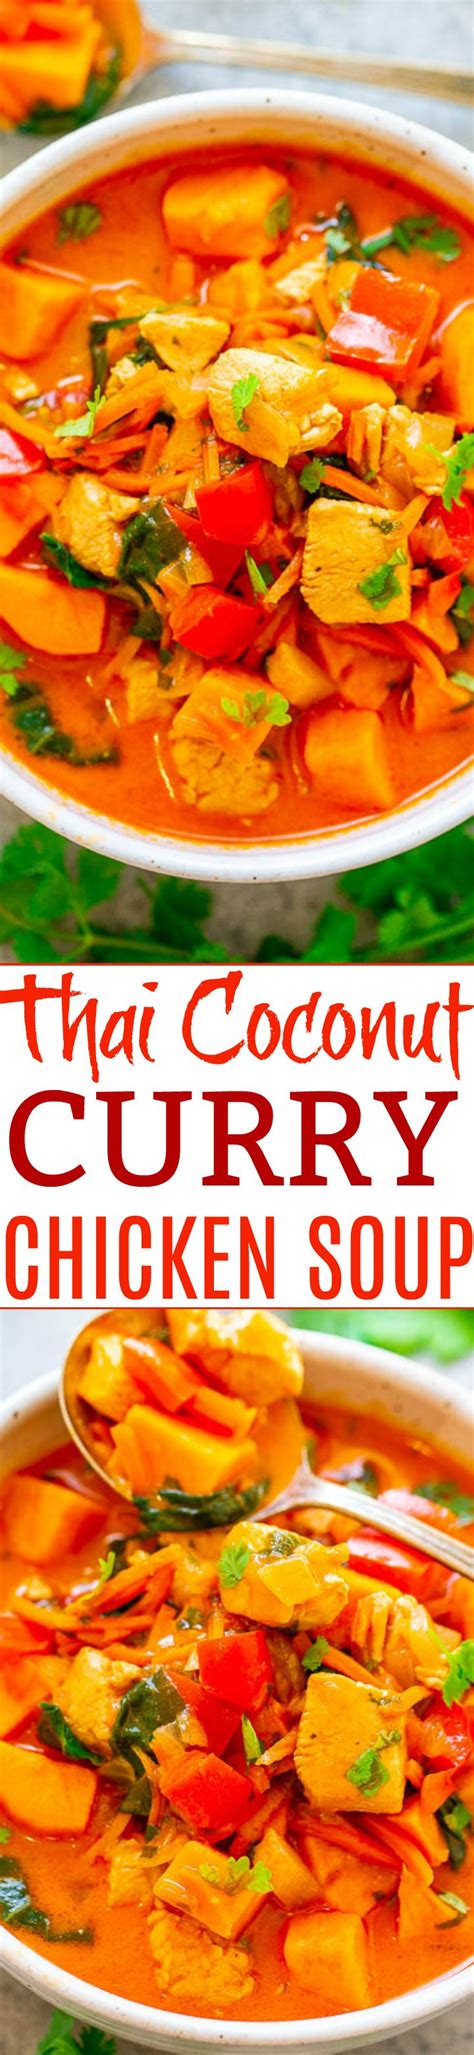 It is light yet creamy, sweet yet tangy, bright and salty tart, and bursting with layer upon layer of fantastic flavor. Thai Coconut Curry Chicken Soup - EASY, ready in 30 ...